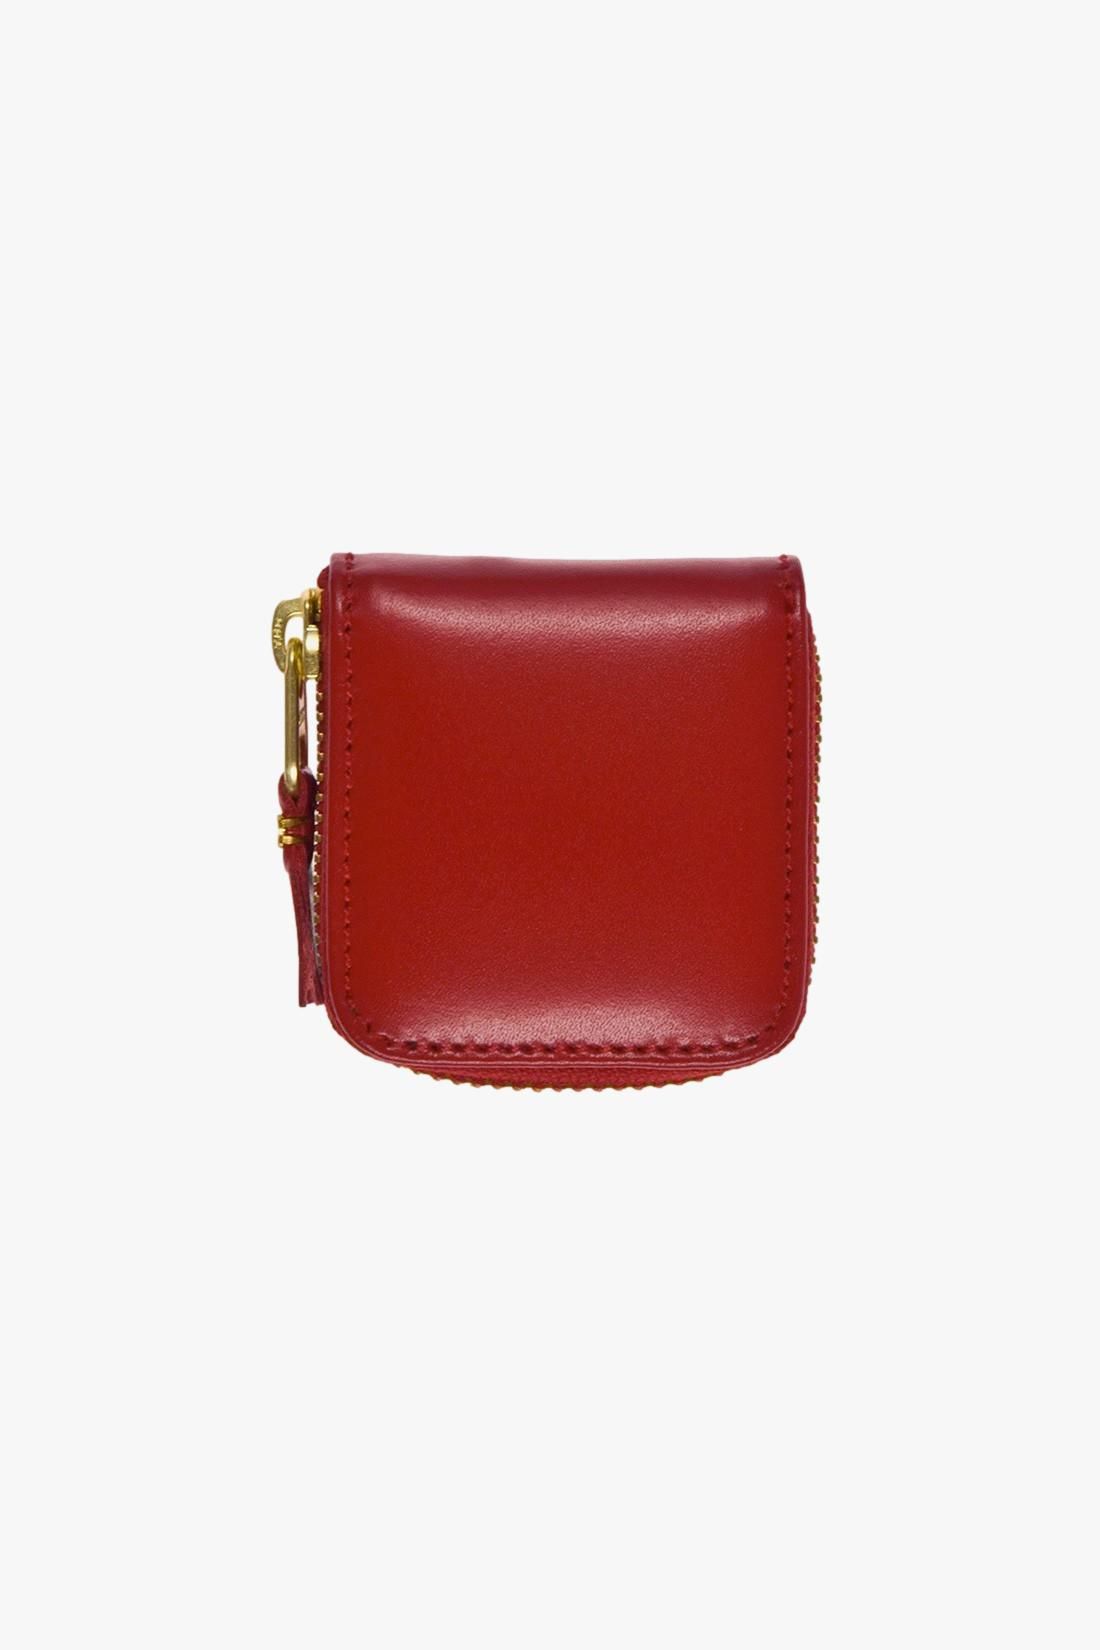 COMME DES GARÇONS WALLETS / Cdg leather wallet classic Red